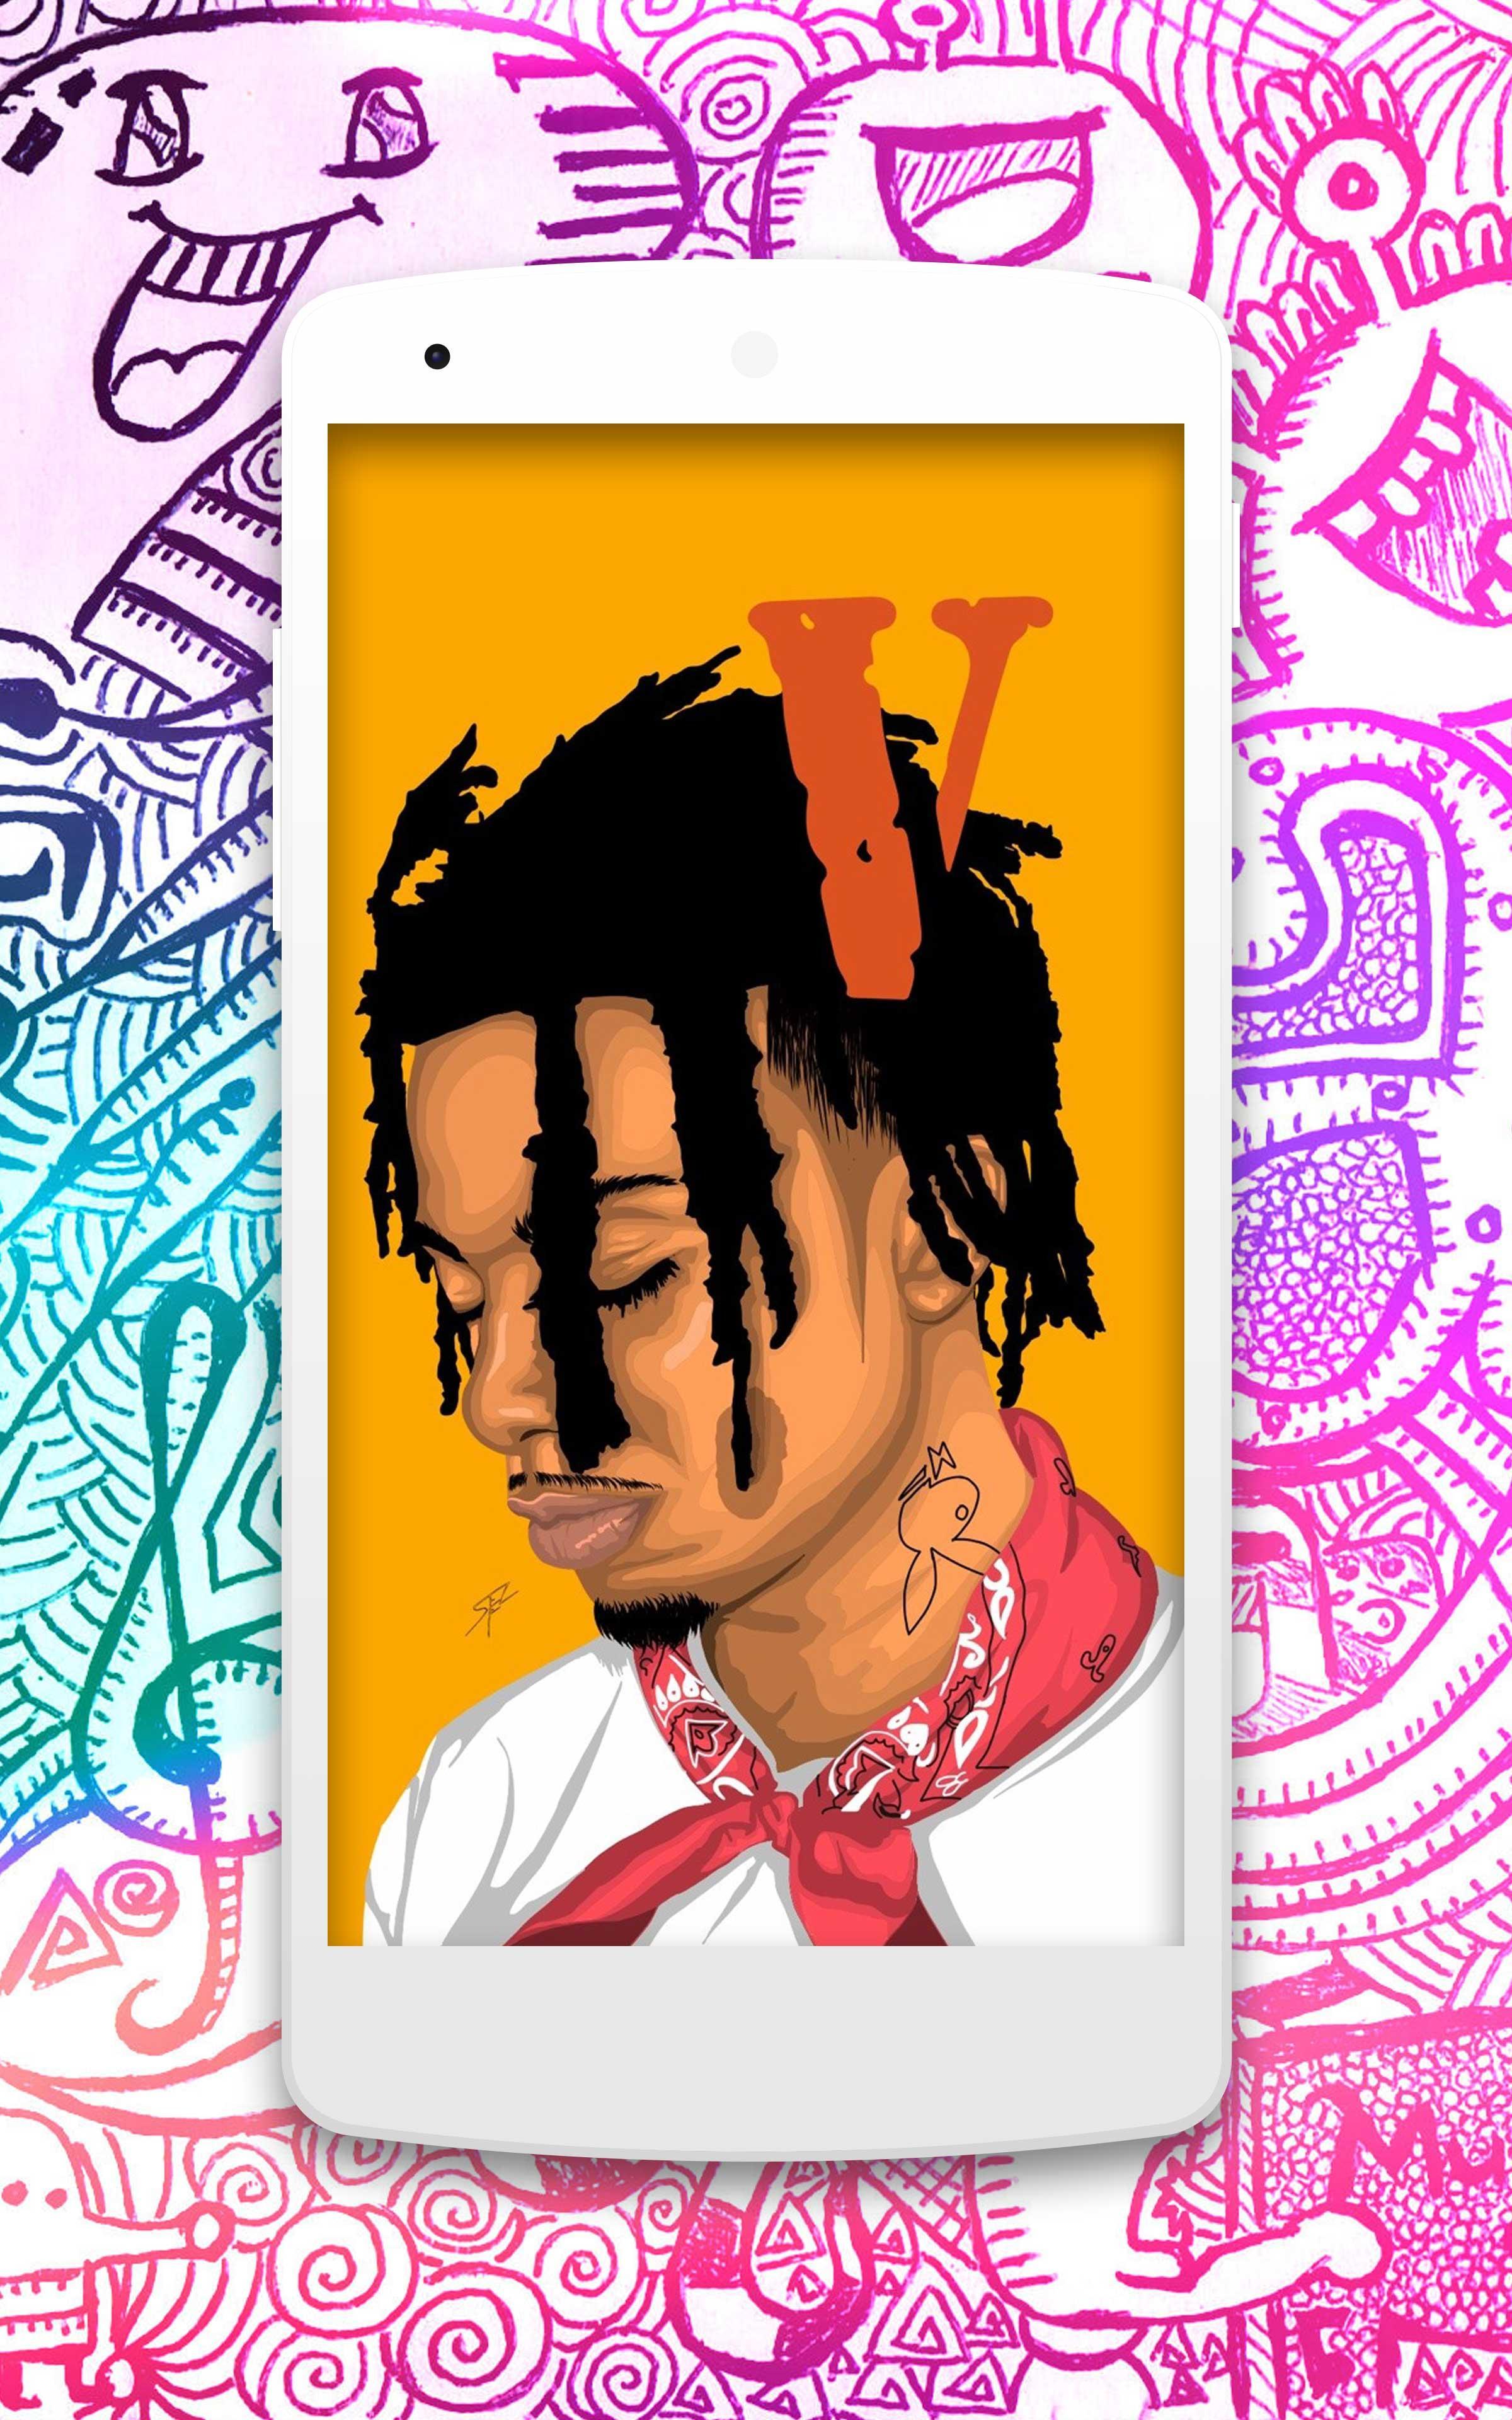 PLAYBOI CARTI Wallpaper HD for Android